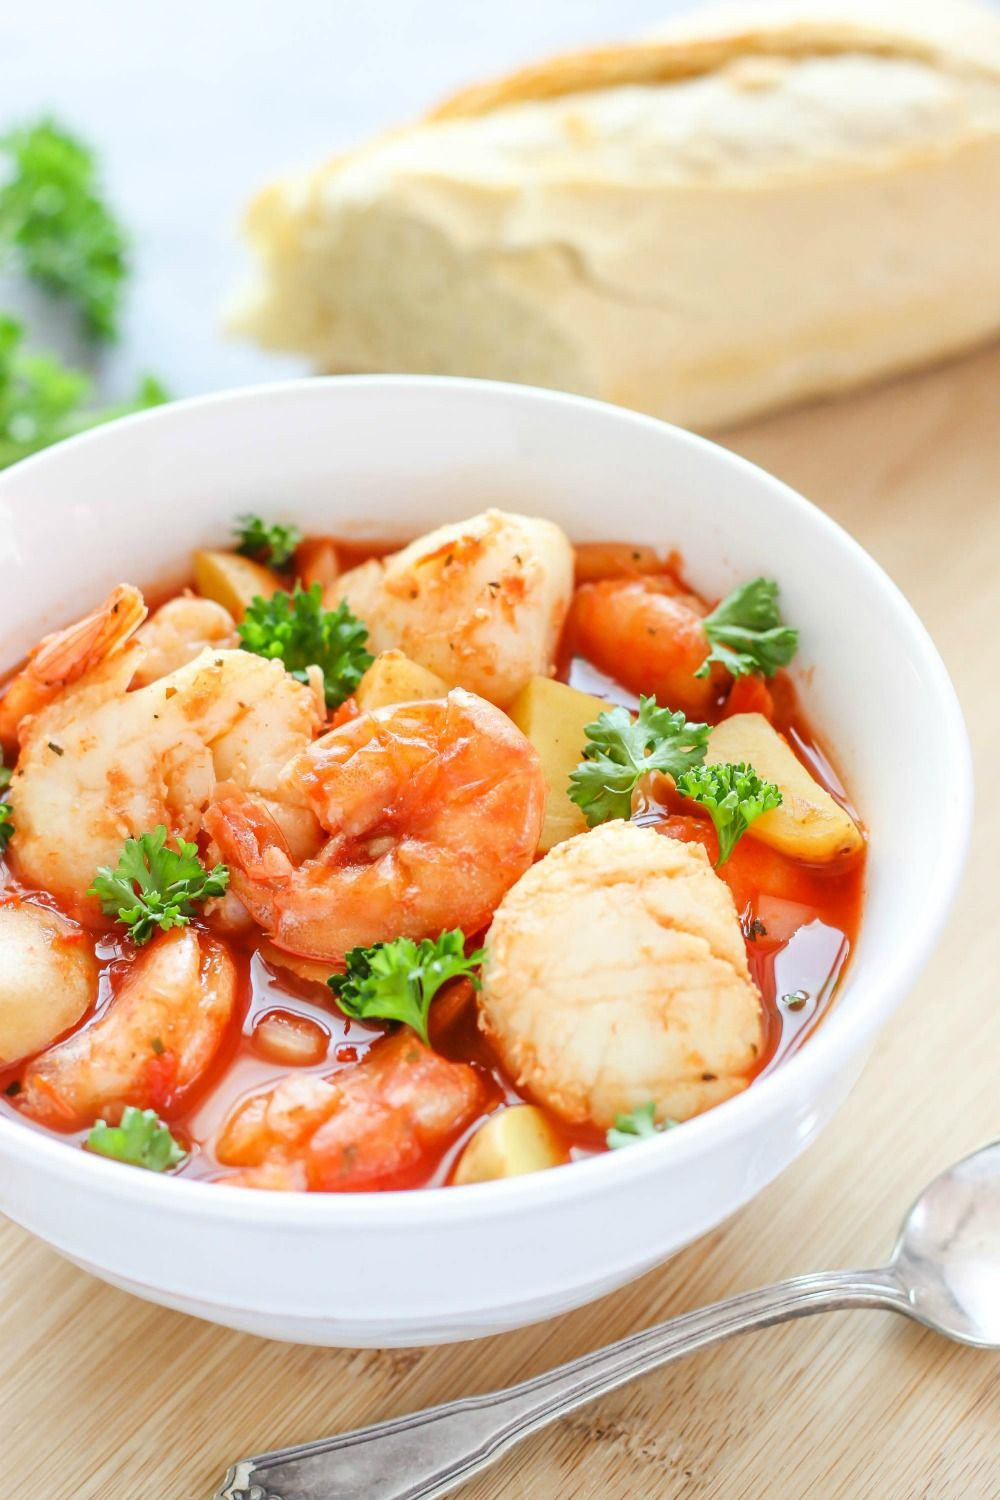 Tomato Based Seafood Stew
 Slow Cooker Seafood Stew Recipe